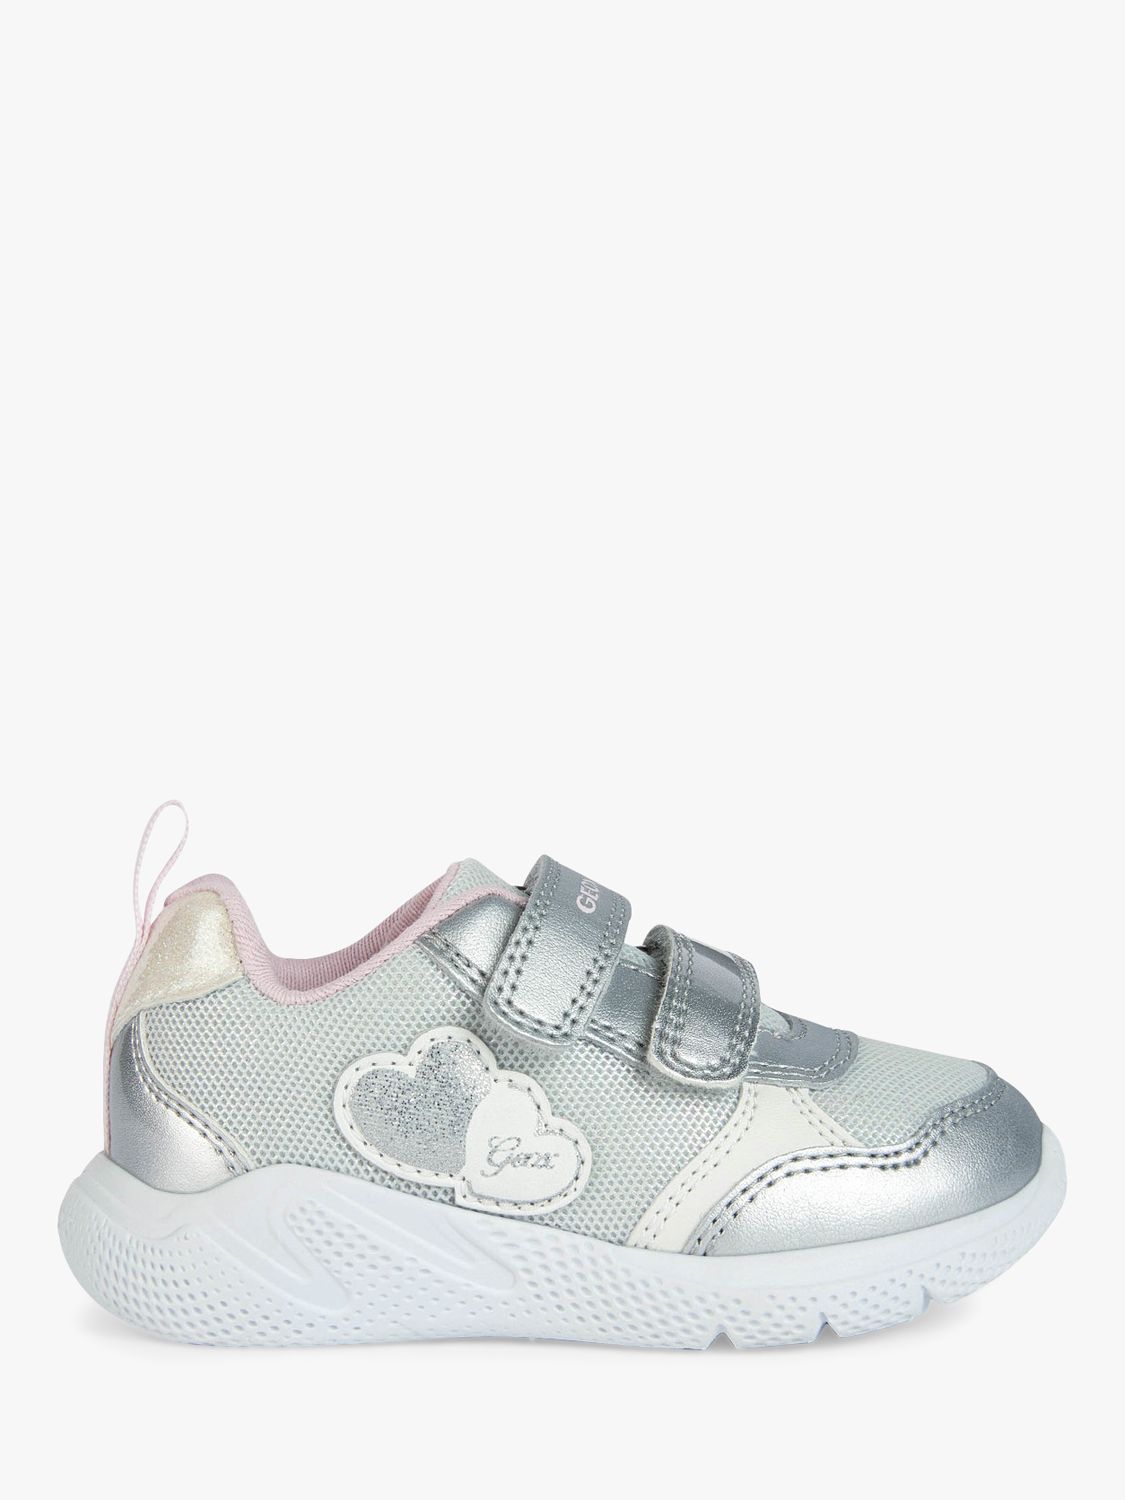 Geox Baby & Toddler Shoes John Lewis & Partners